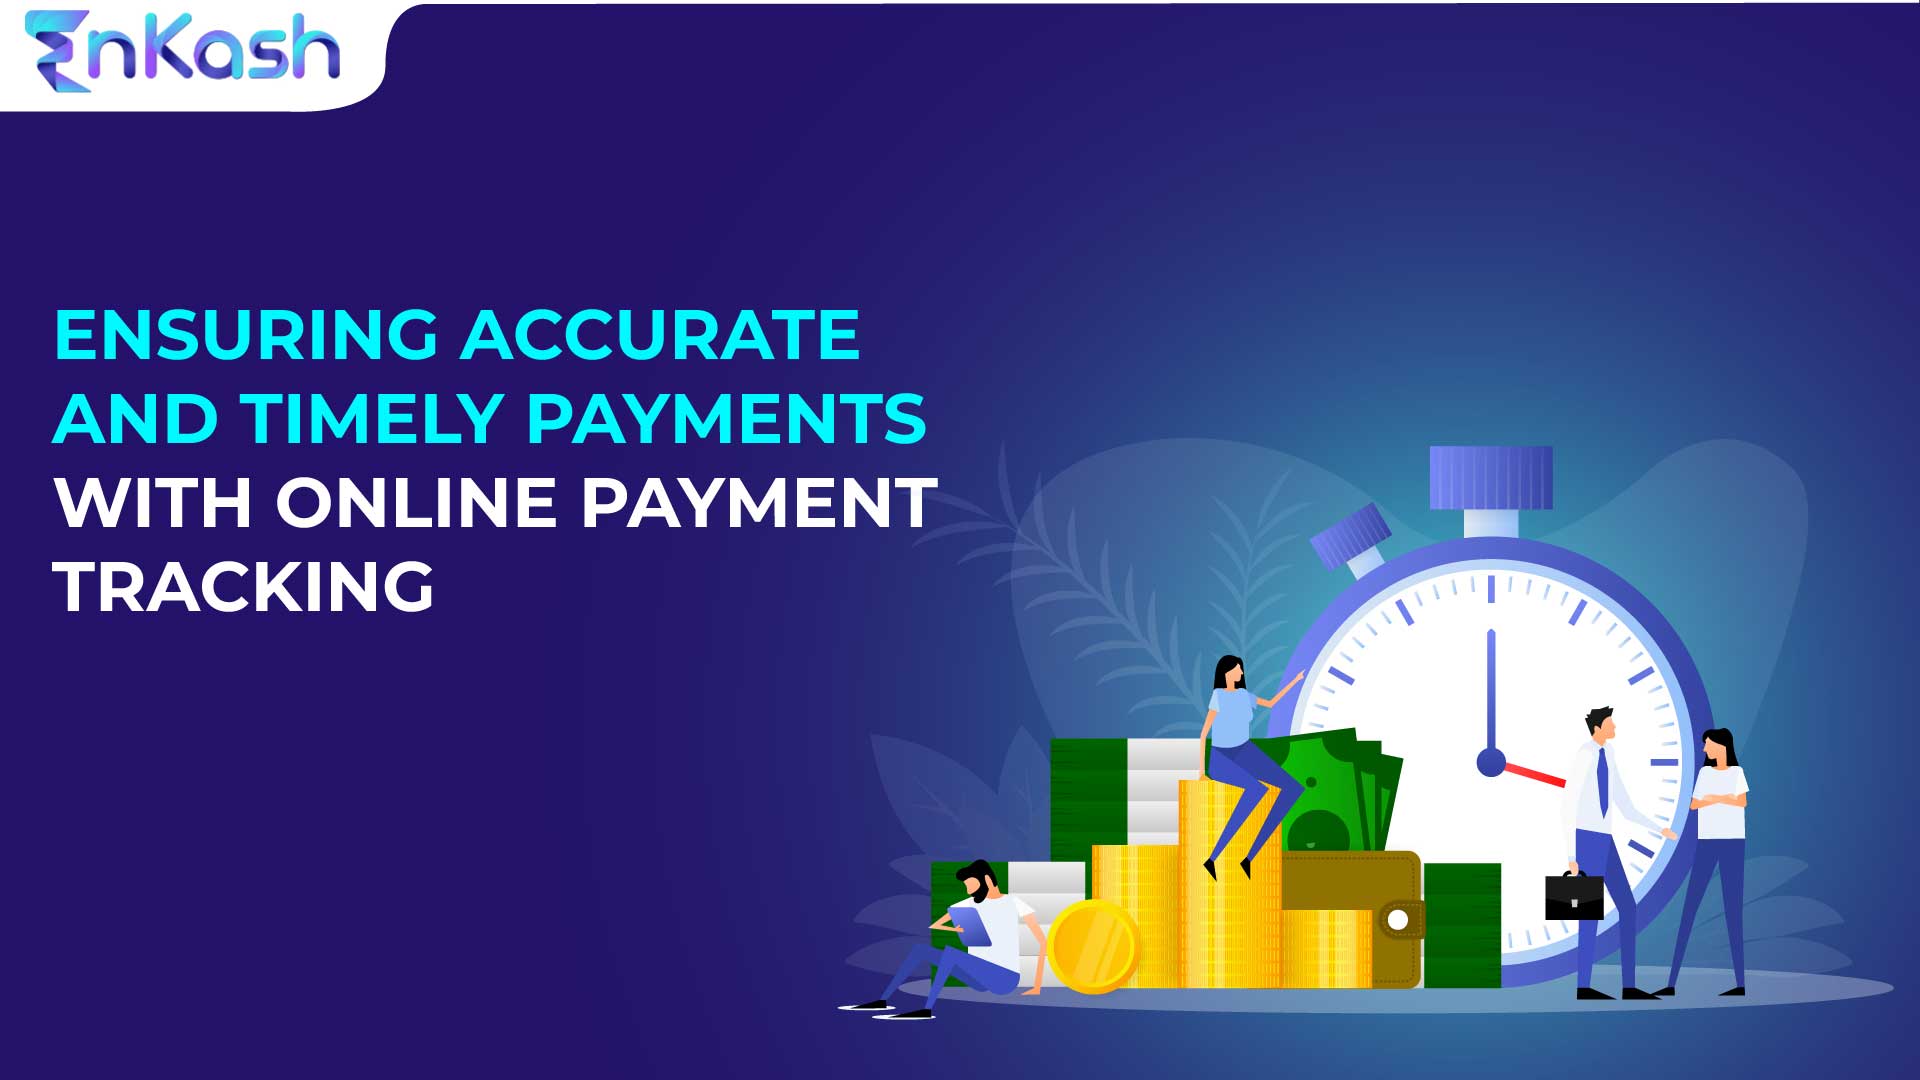 Ensuring accurate and timely payments with online payment tracking